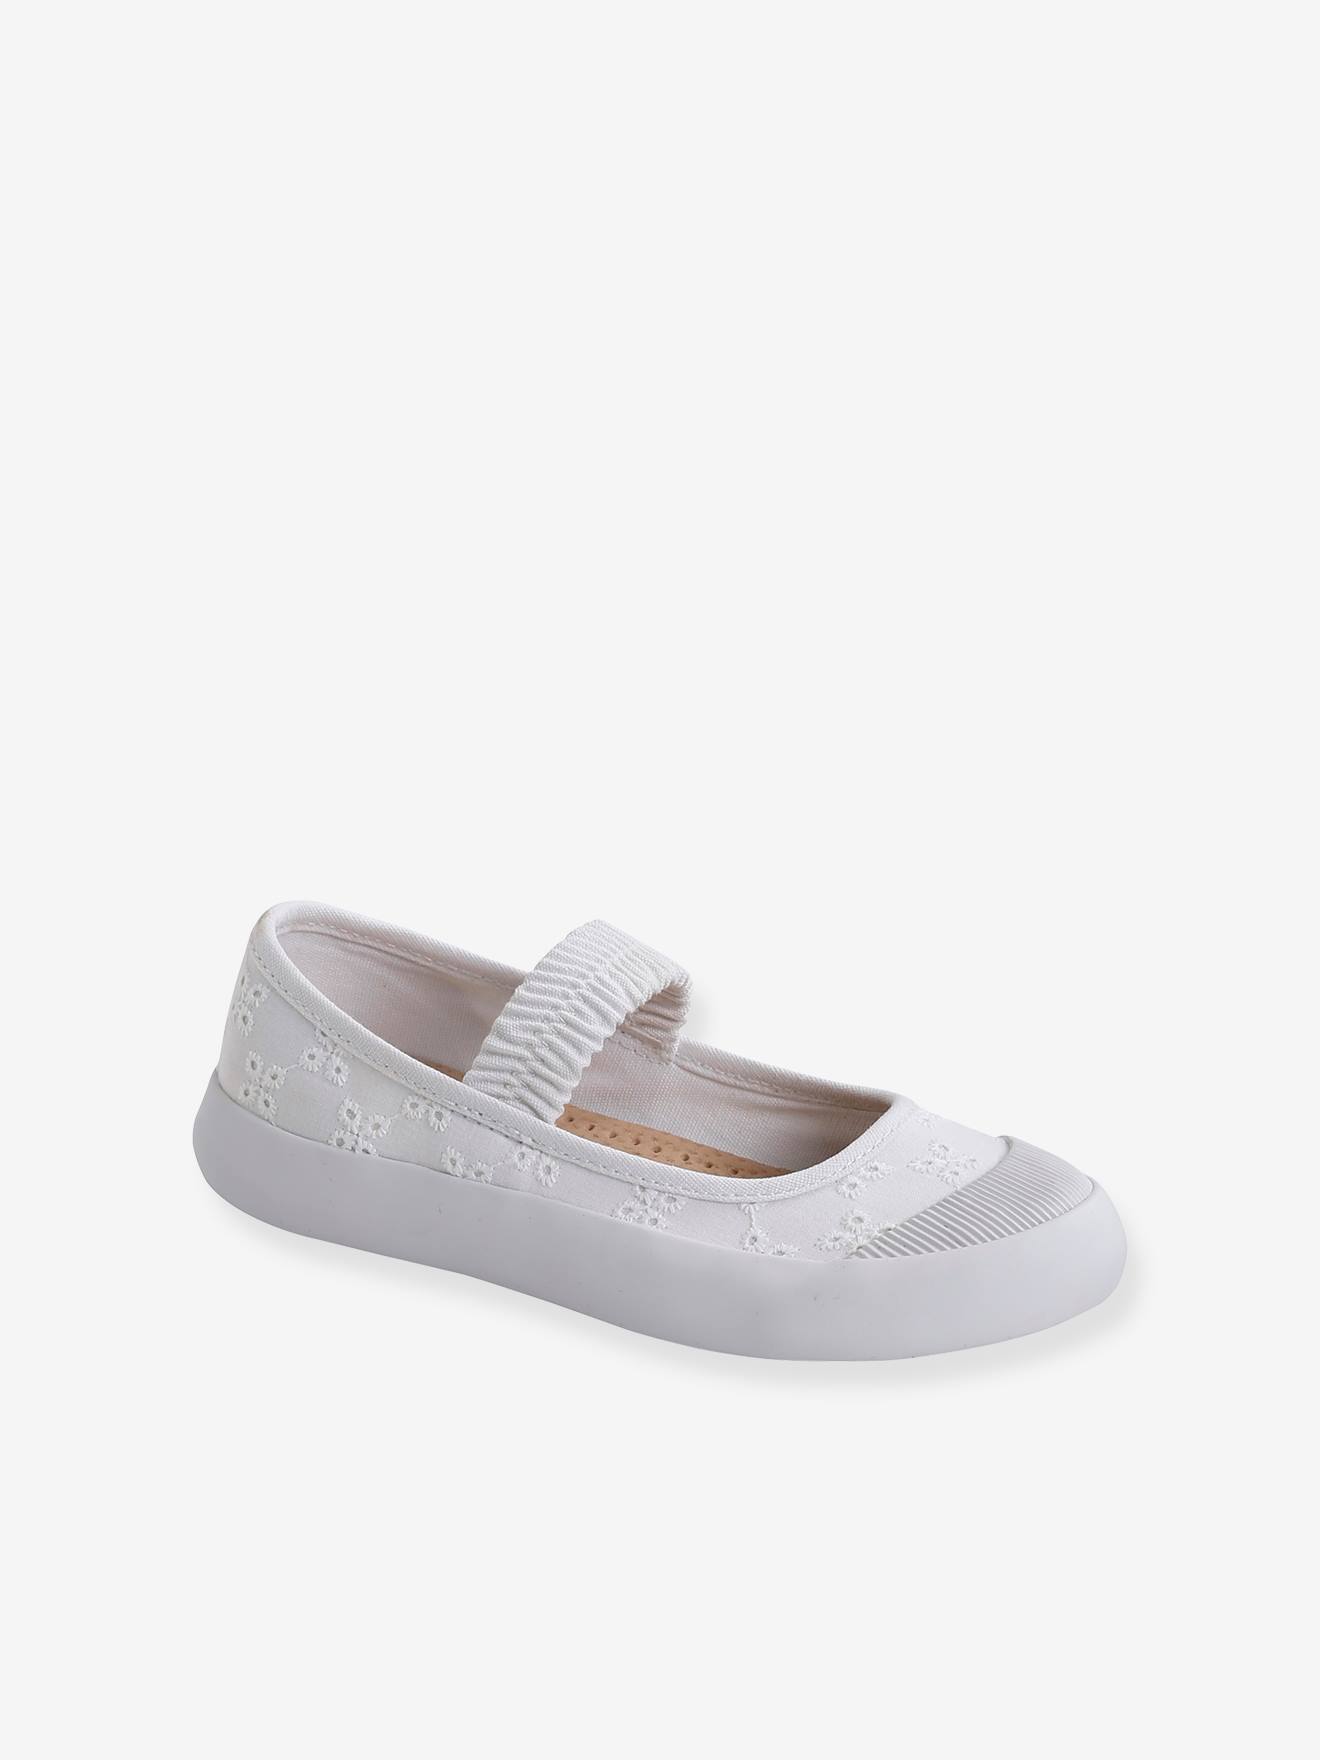 Mary Jane Shoes in Canvas for Girls white